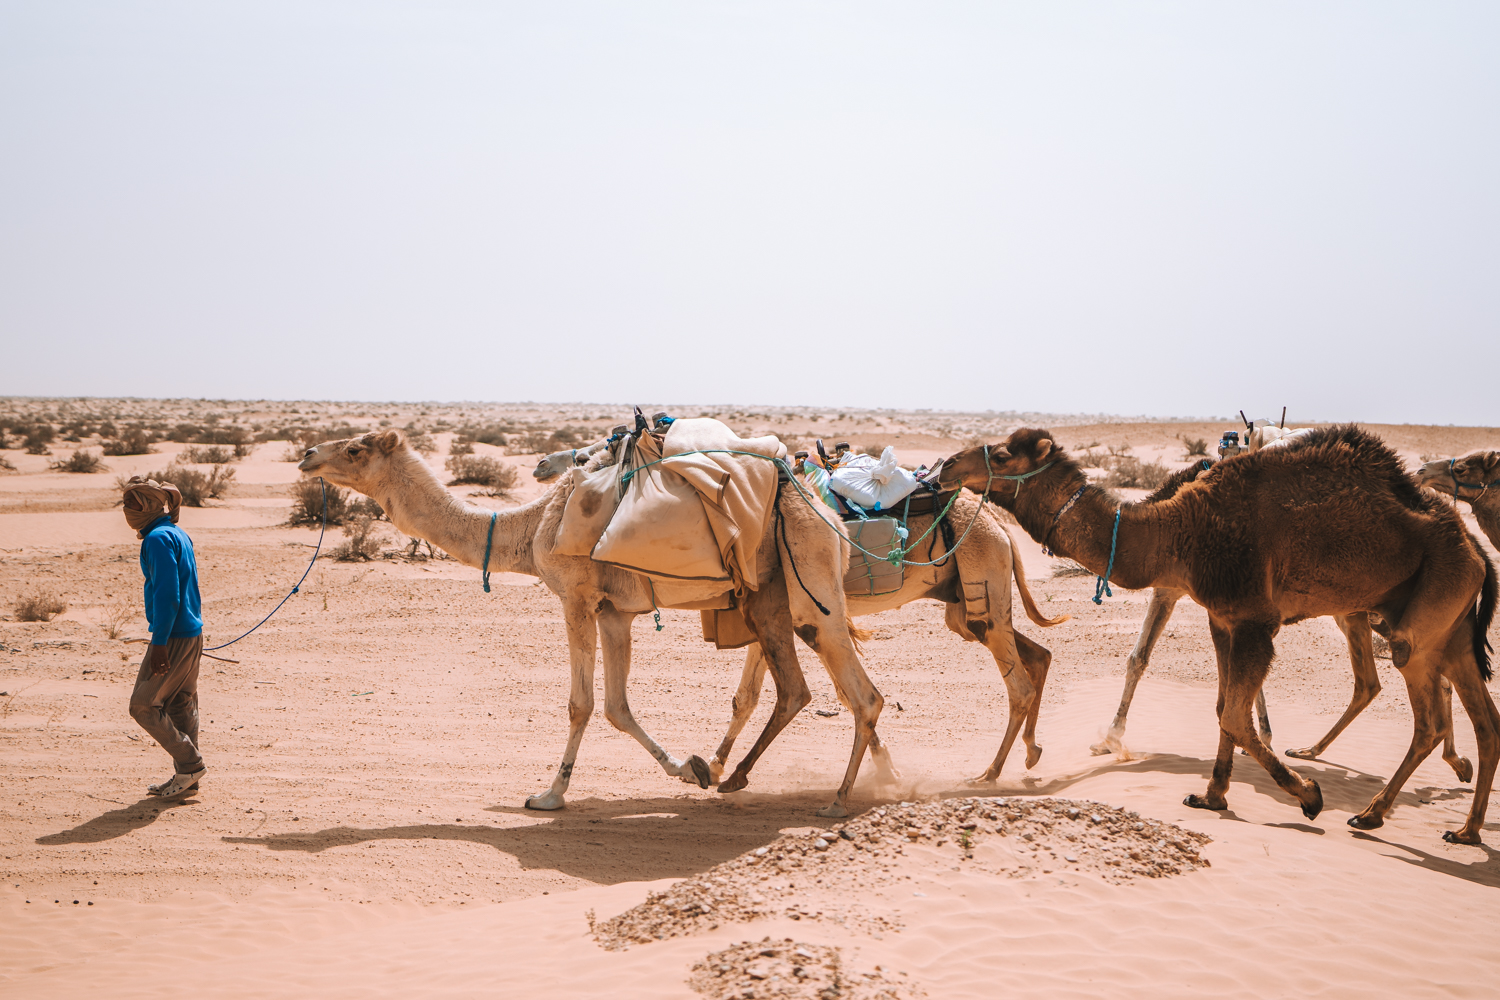 Camels in Sahara desert, things to do in Tunisia